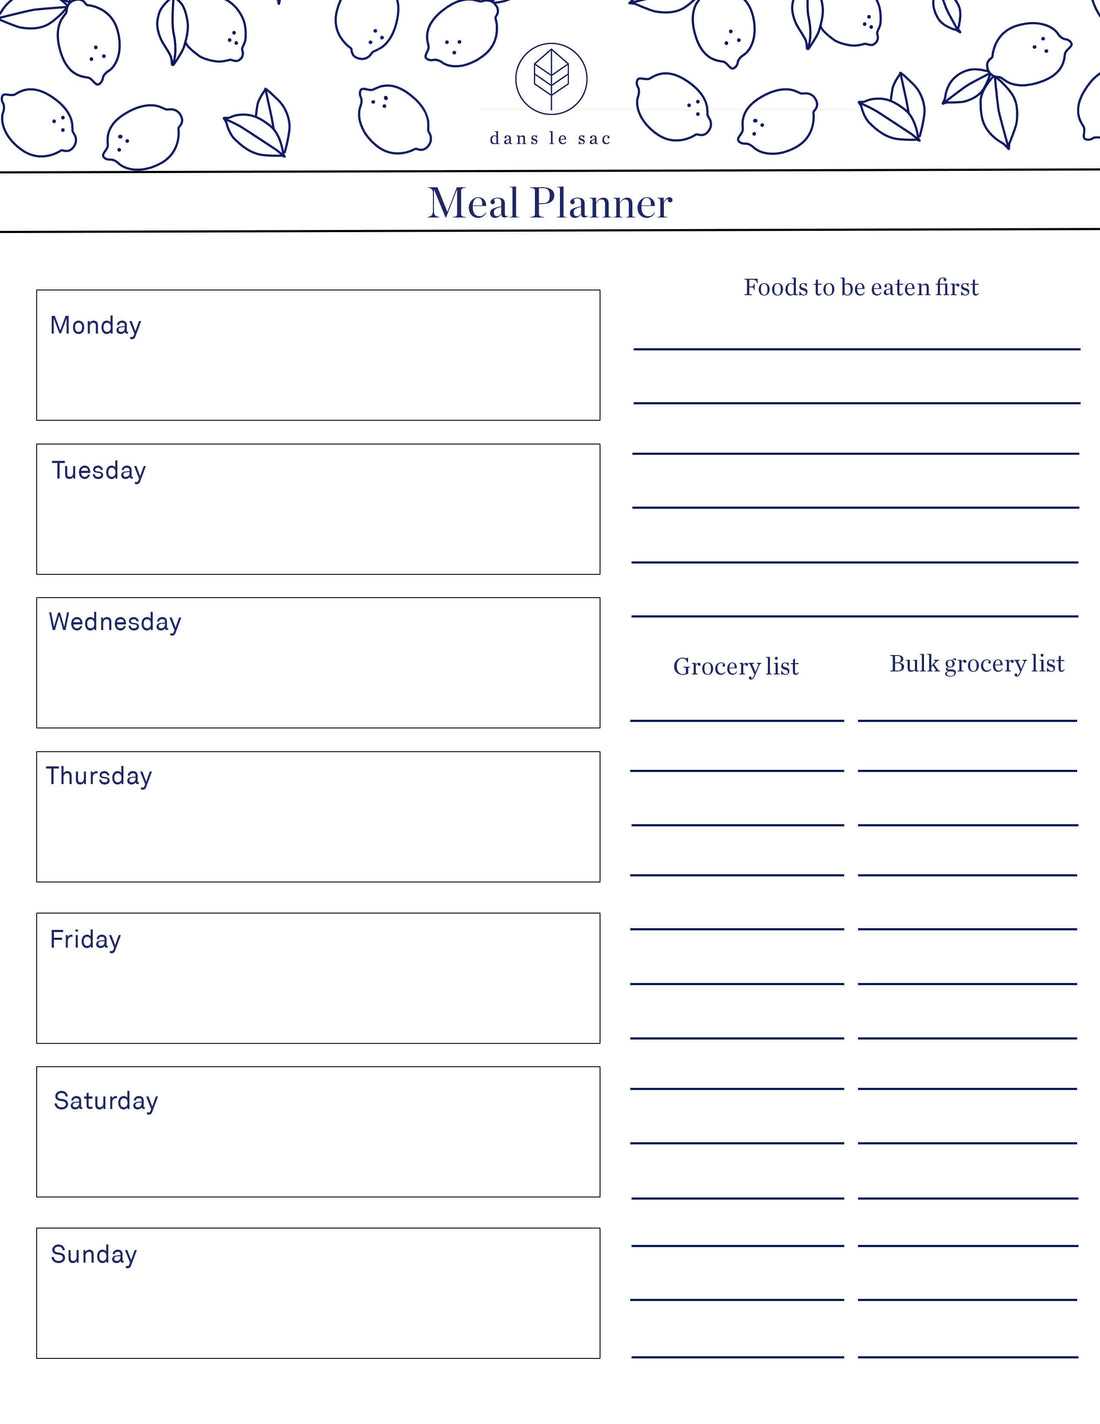 Meal Planner - free download